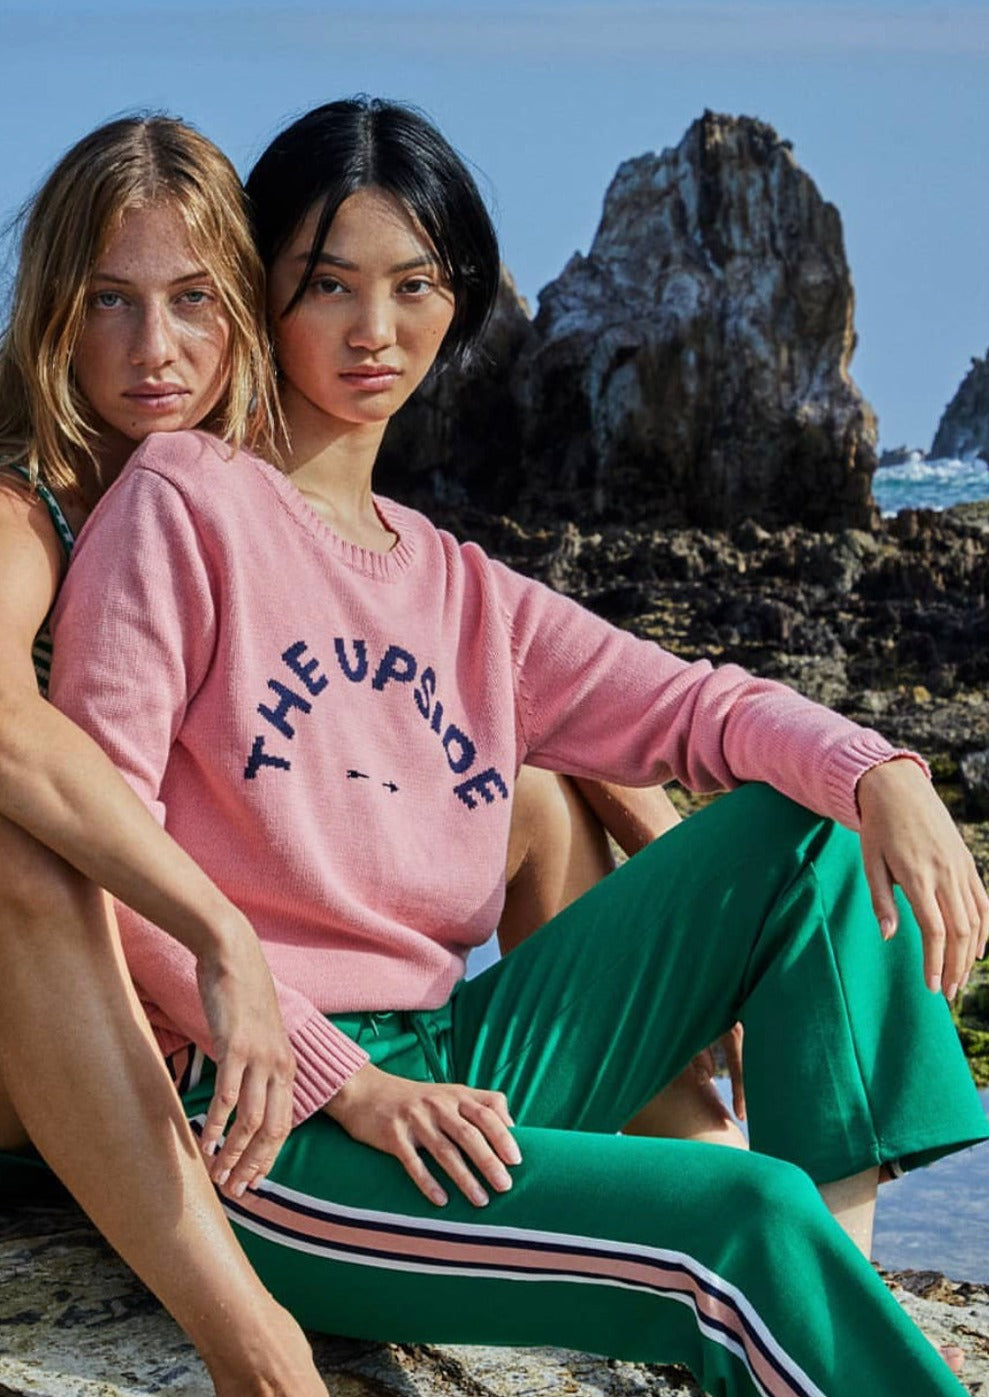 Biarritz Bondi Knit - Flamingo Pink, by The Upside Think pink in our Biarritz Knit Bondi Sweater  Knitted Flamingo Pink crew in our classic Bondi silhouette. The Upside horseshoe logo knitted at centre front in contrast Navy. Combed cotton for chic comfort.